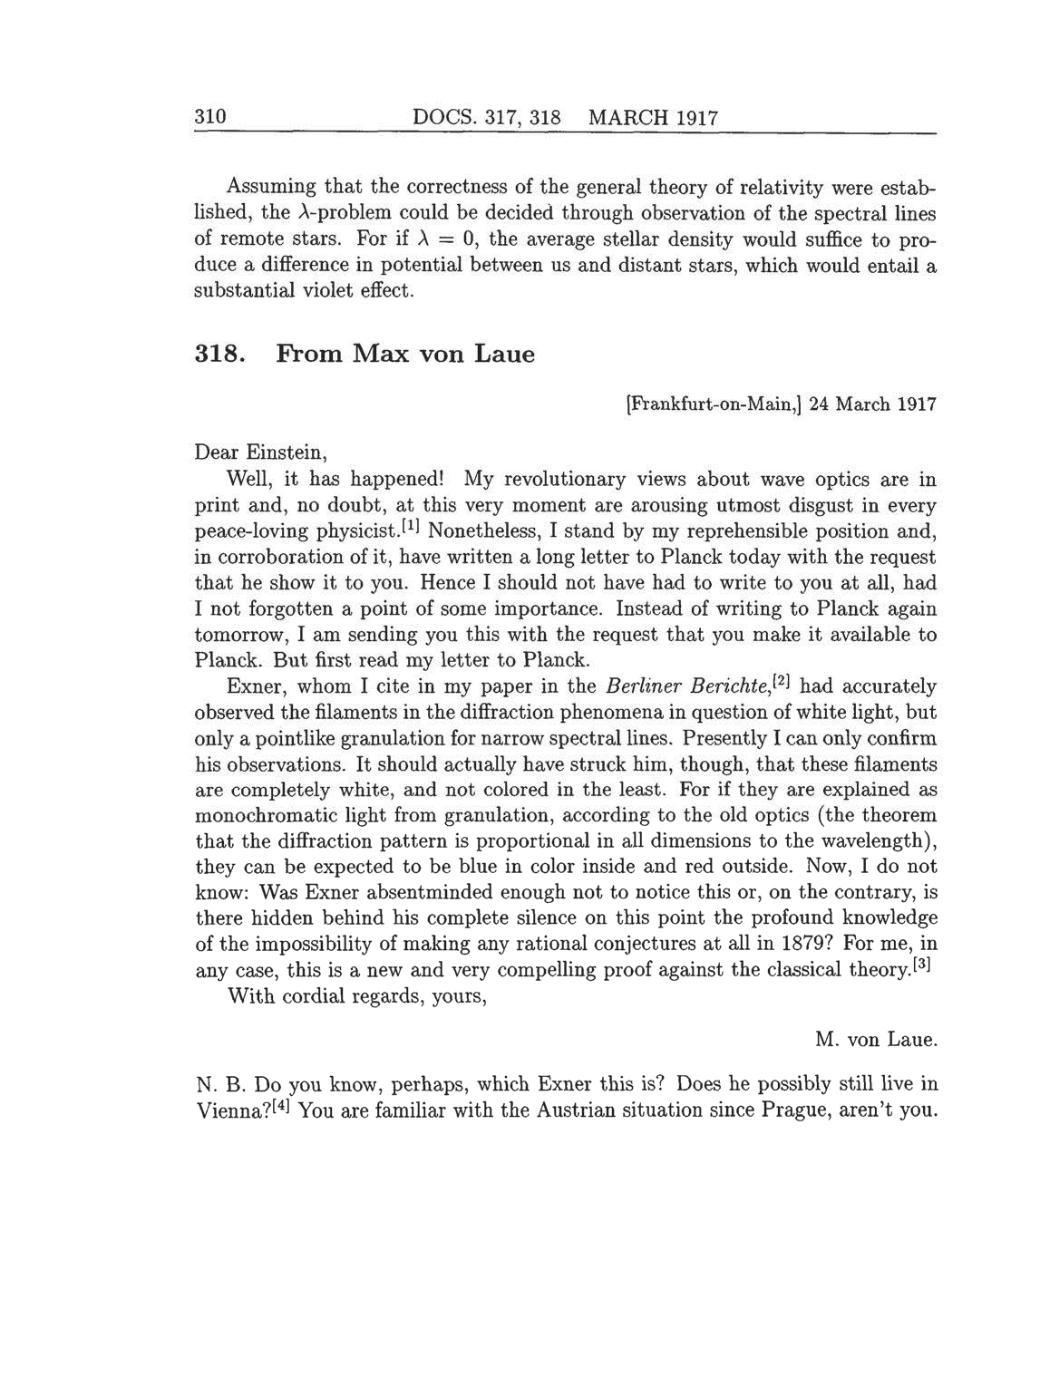 Volume 8: The Berlin Years: Correspondence, 1914-1918 (English translation supplement) page 310